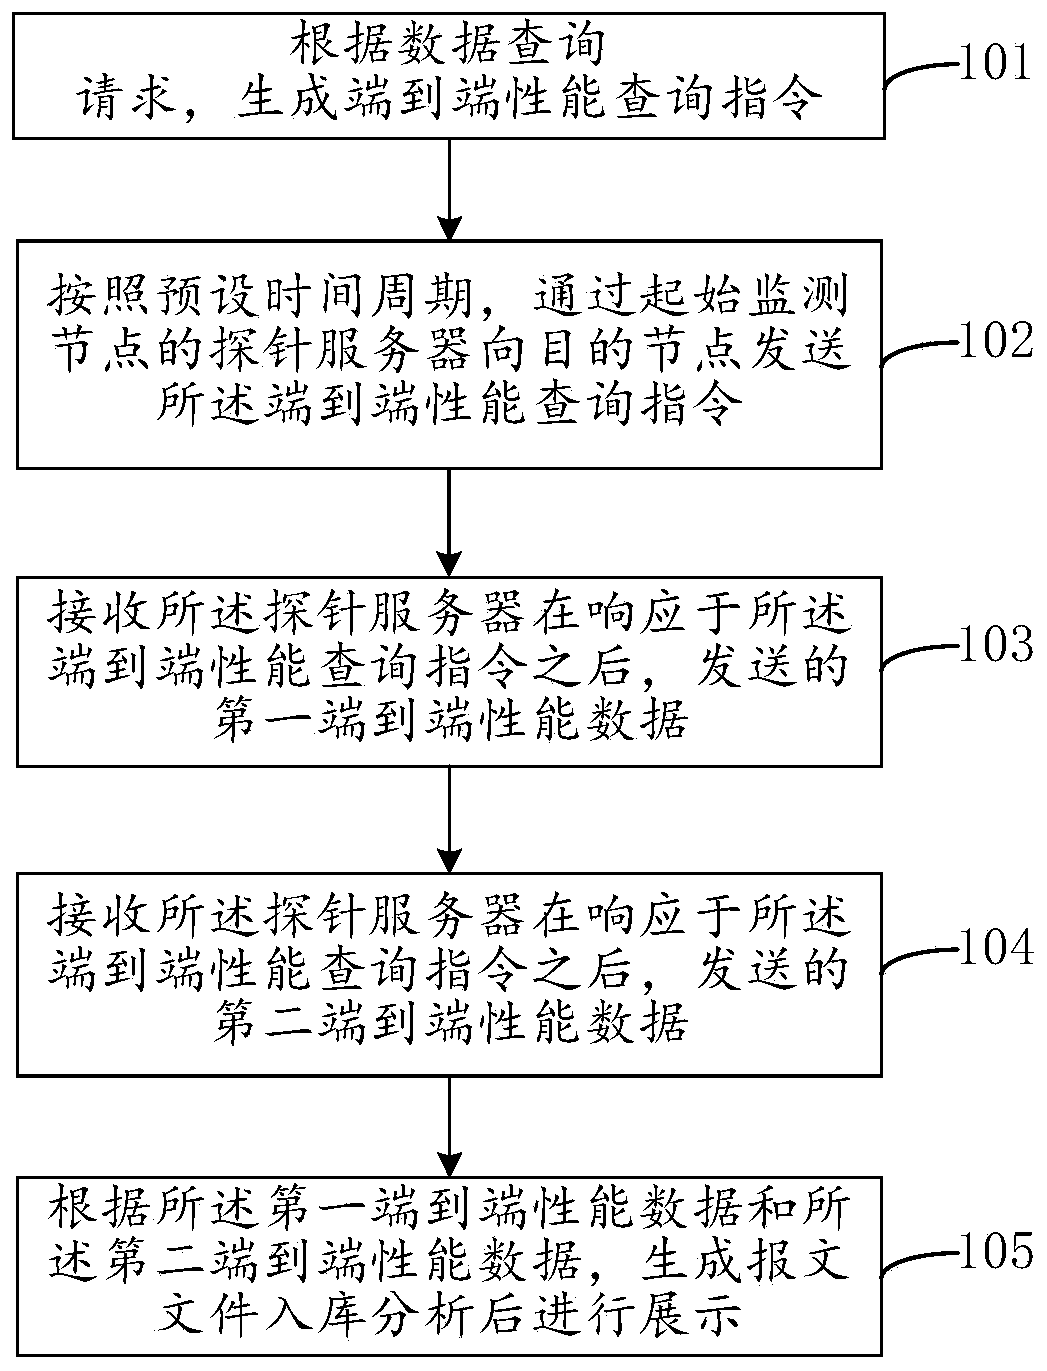 Internet service quality monitoring method and device